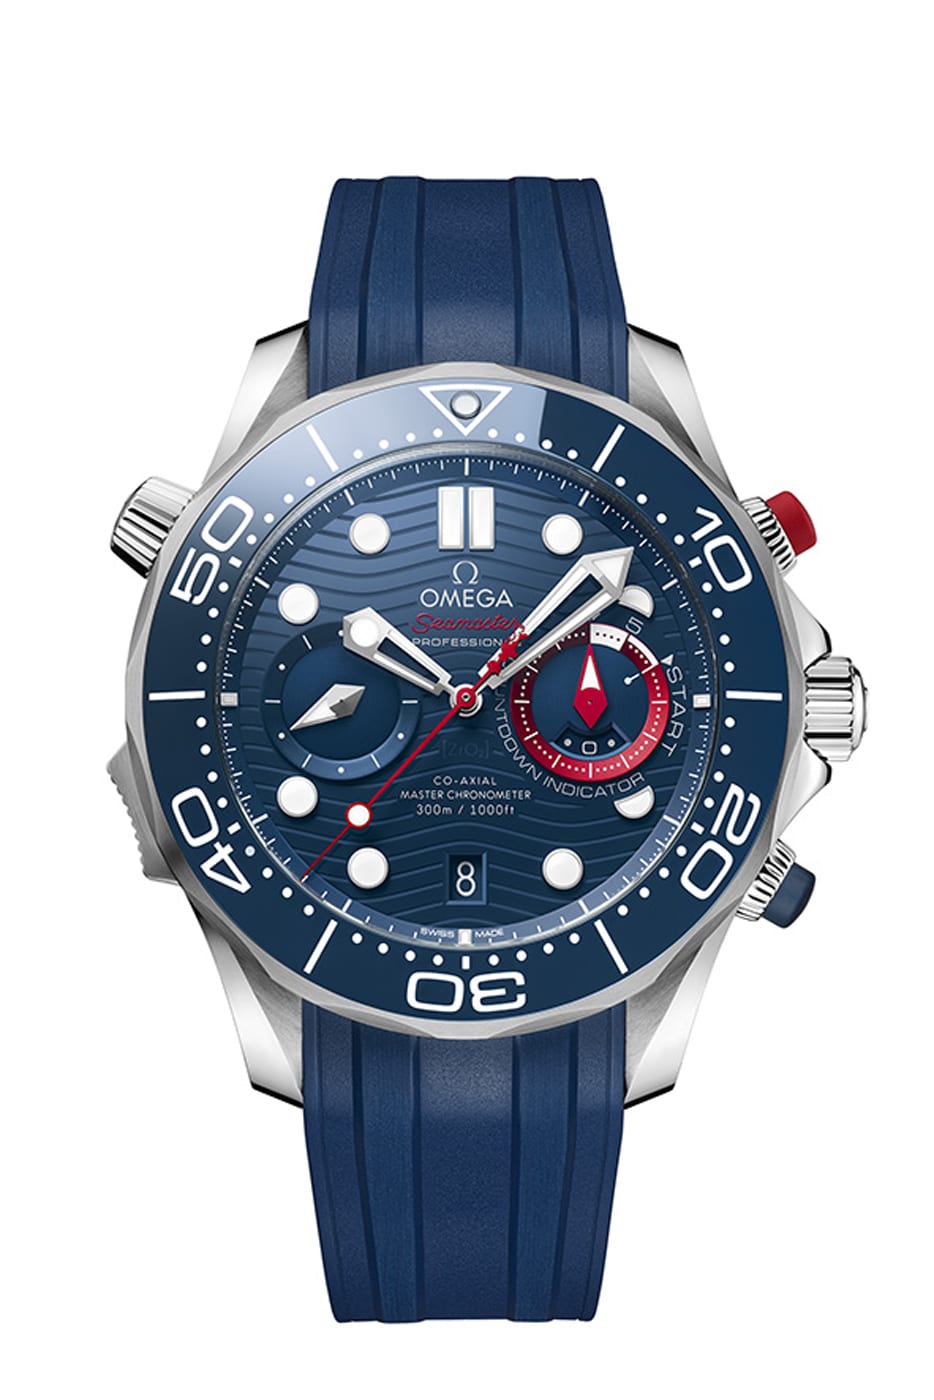 seamaster americas cup omega 6